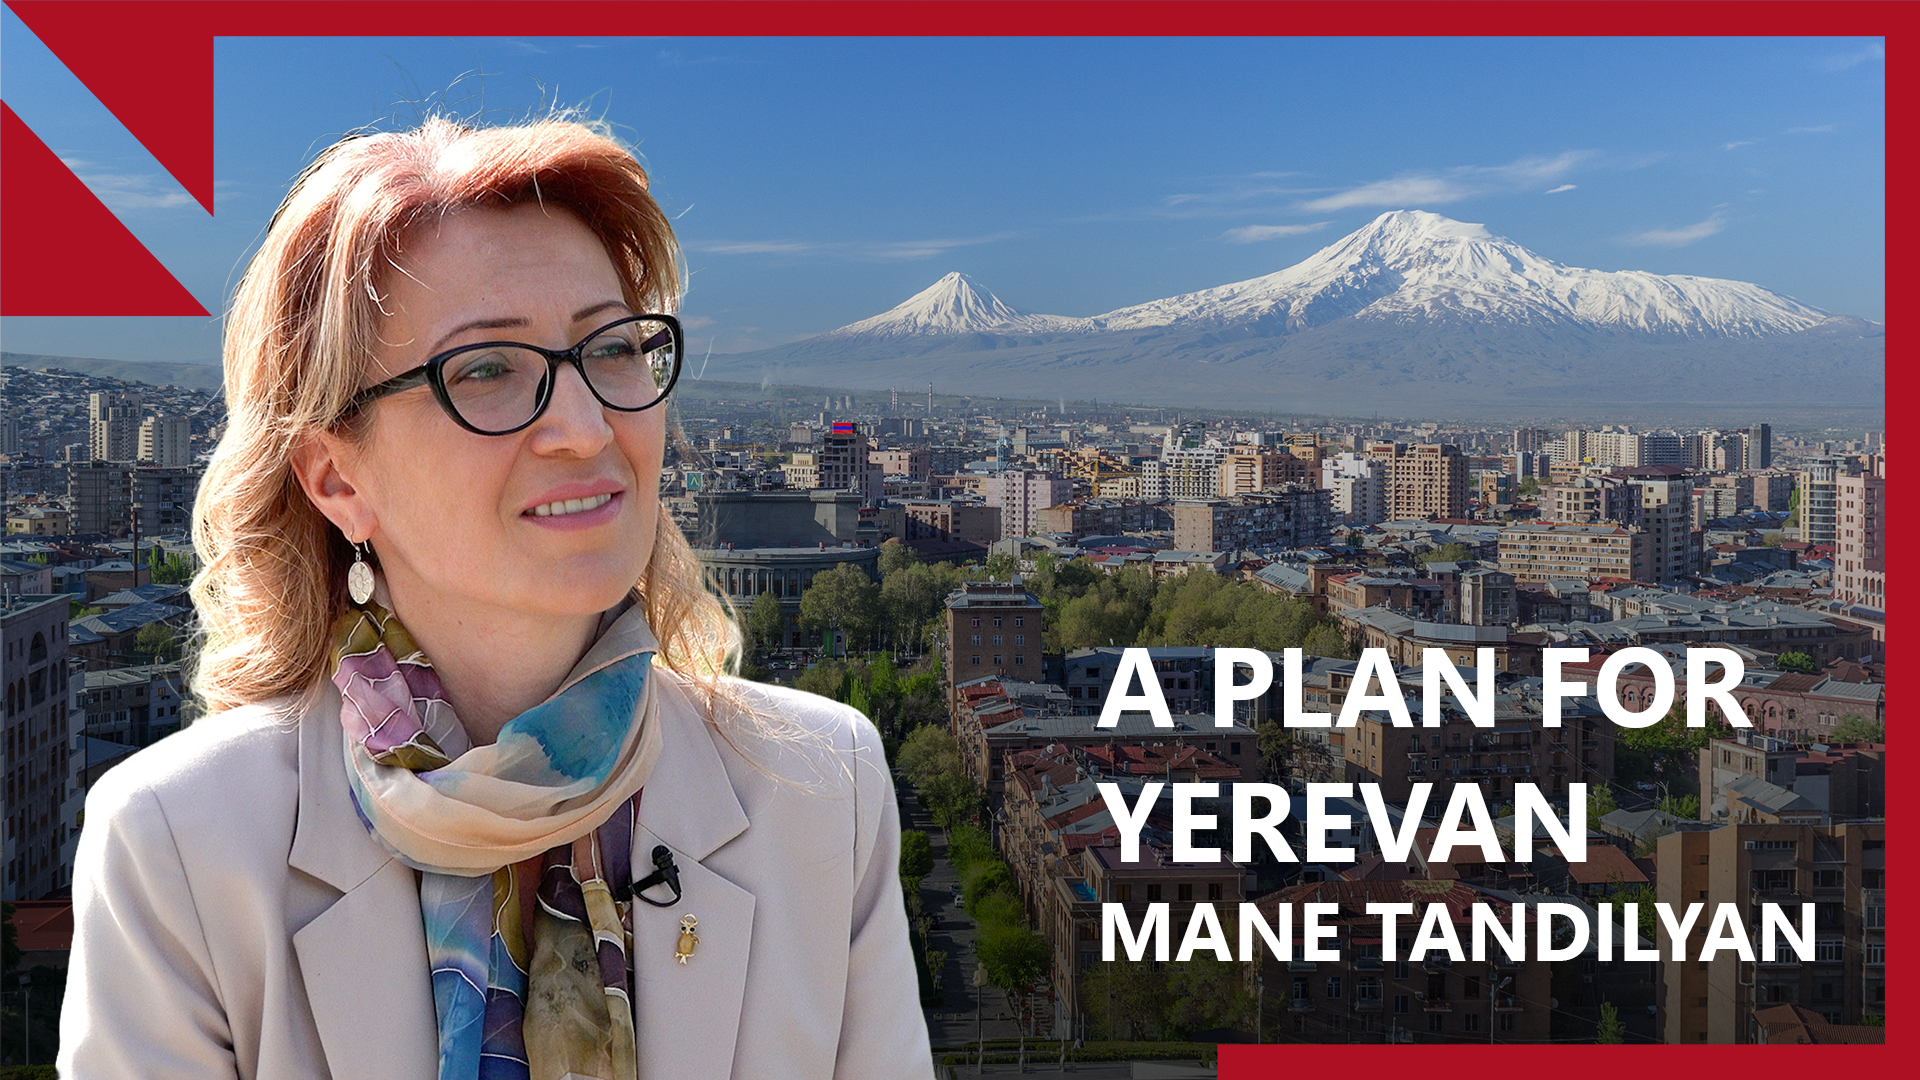 Yerevan Mayoral Candidate on Ambitious Plans for the City